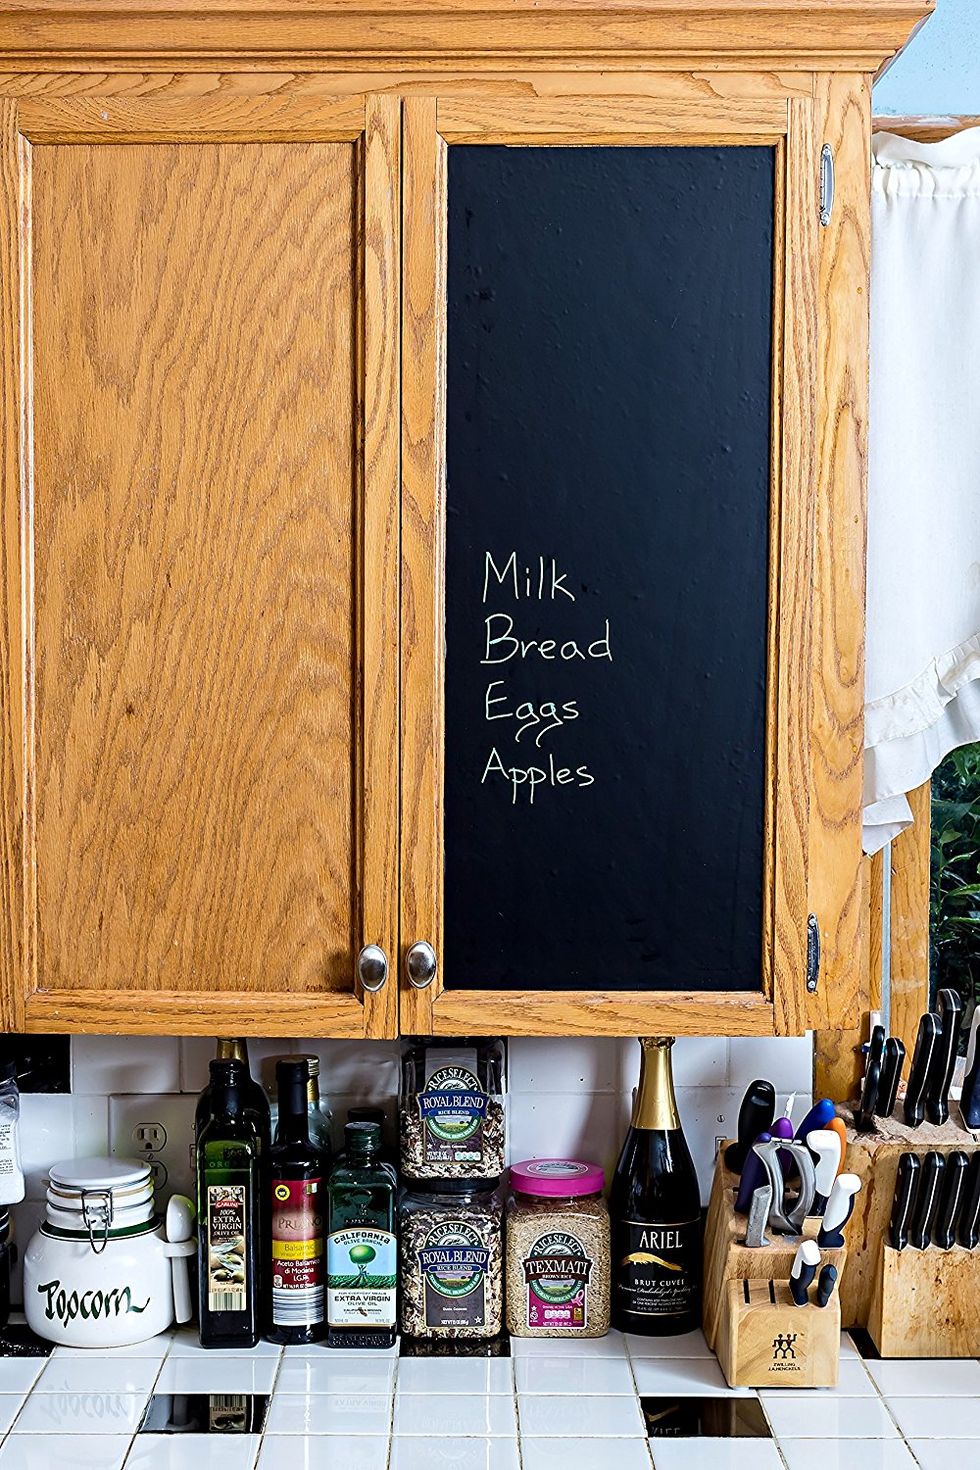 How to Paint a Fridge with Chalkboard Paint